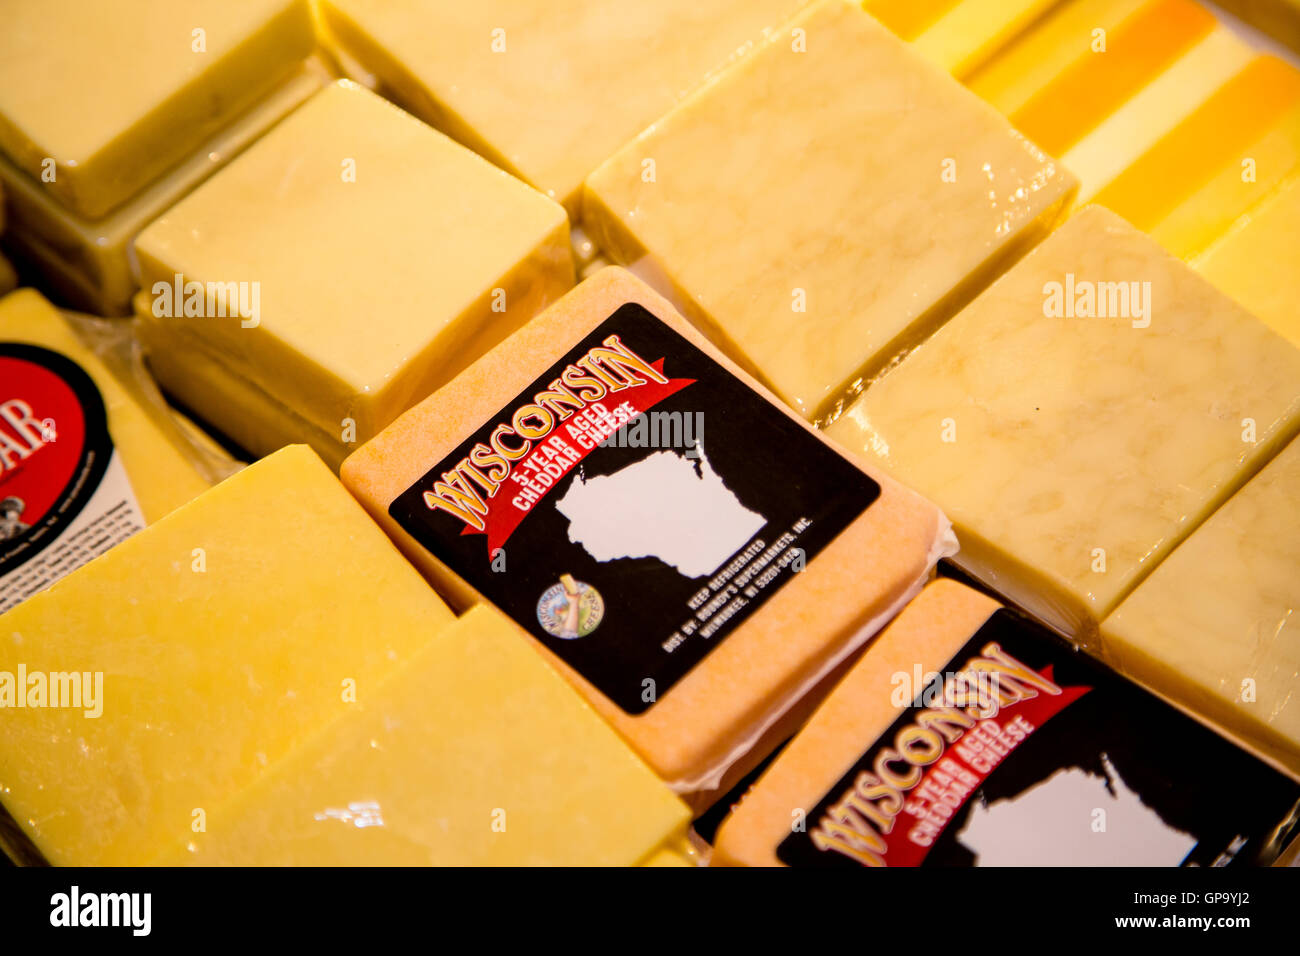 A display of packaged Wisconsin cheddar cheese in the refrigerator case of a grocery store Stock Photo